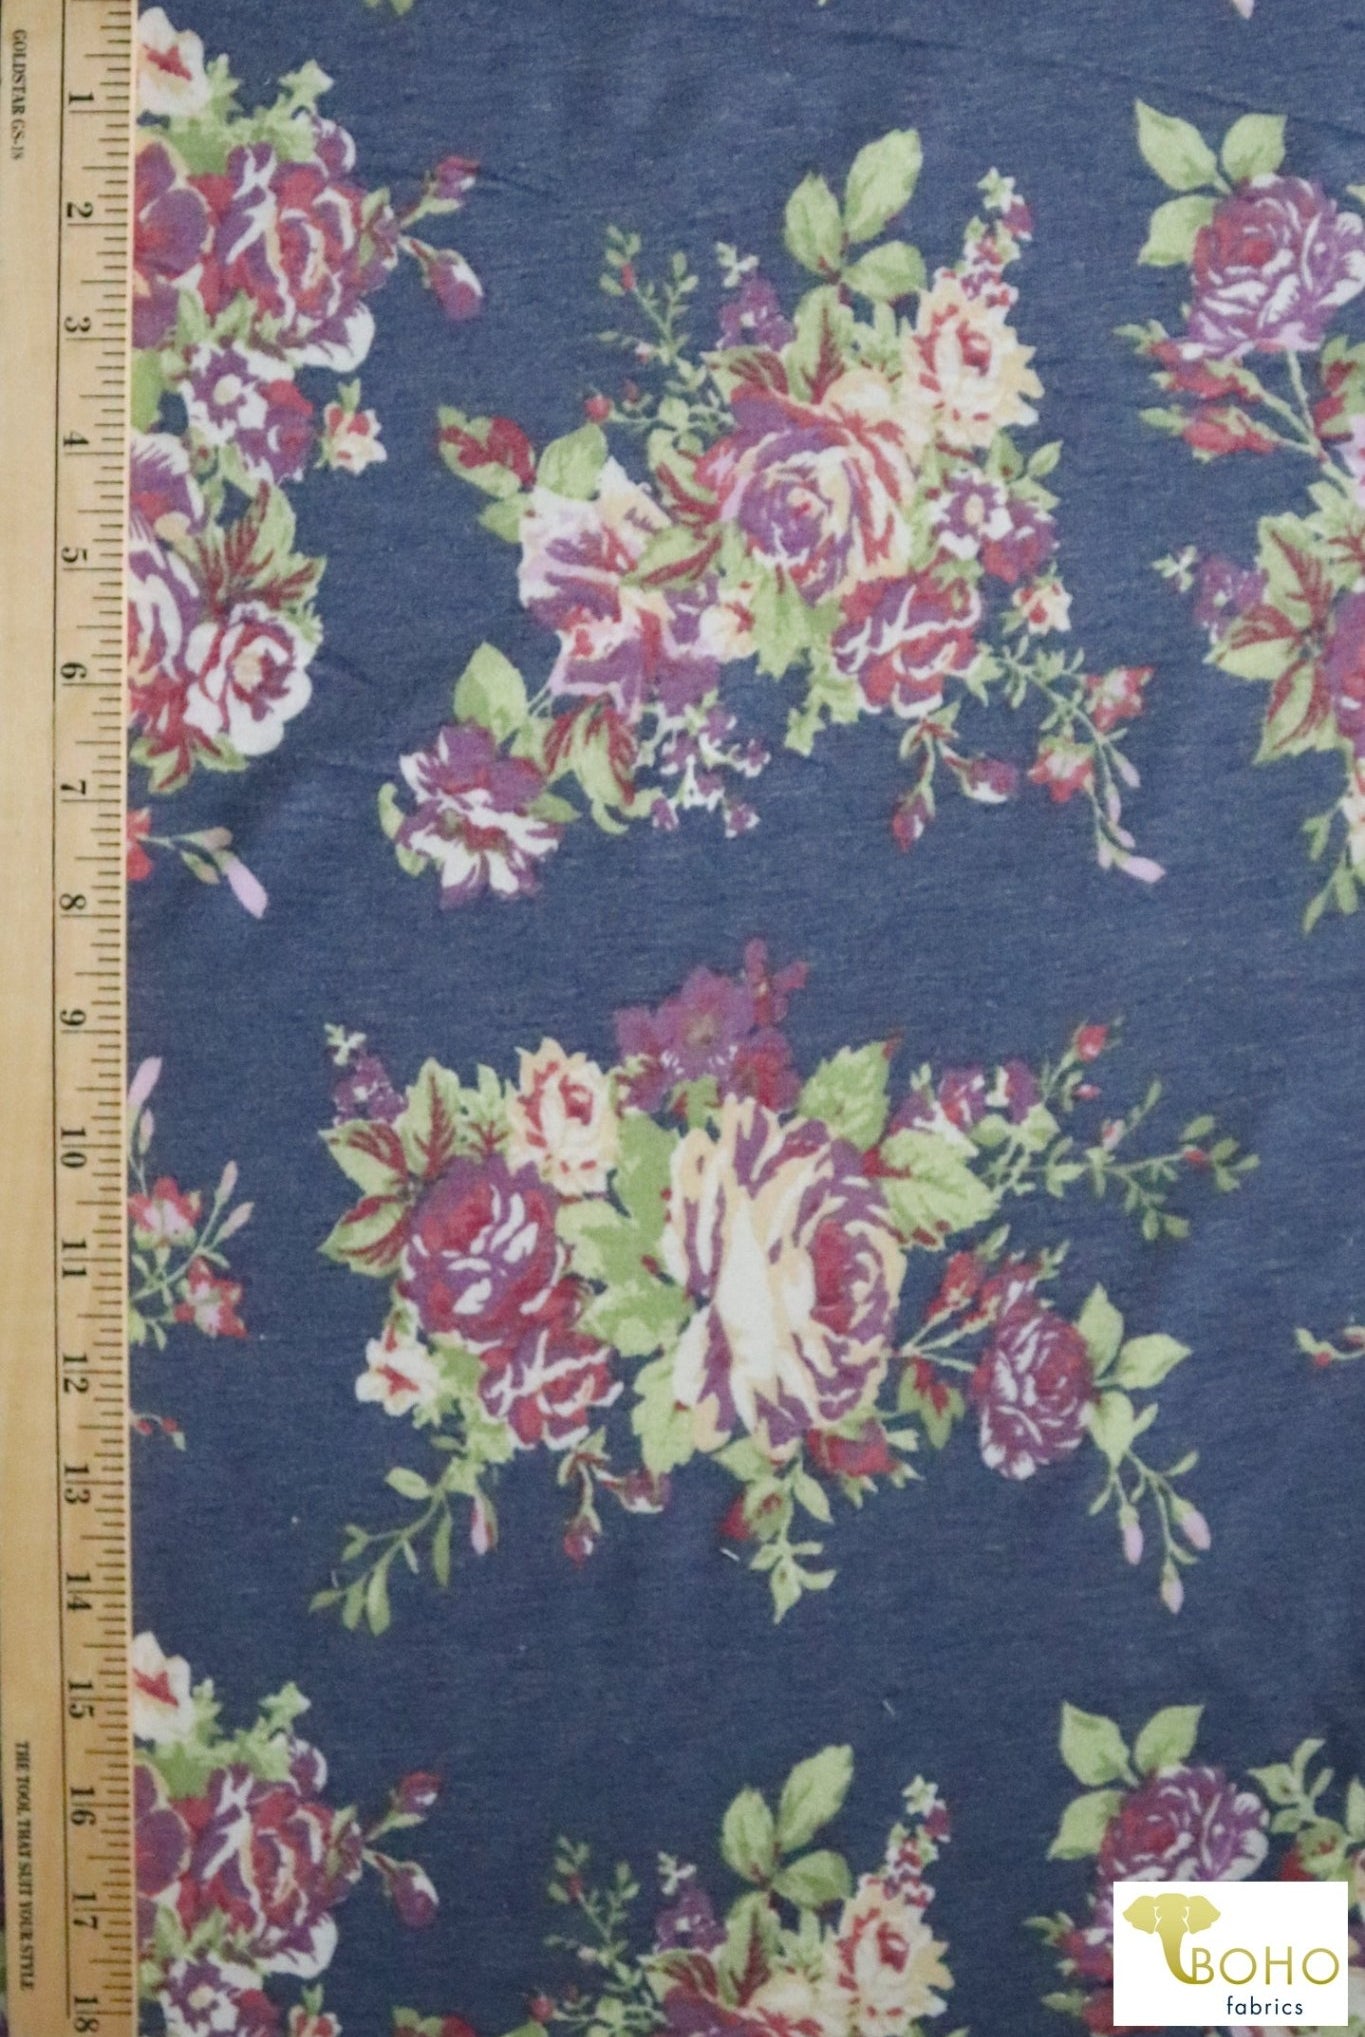 Last Cuts! Novah Florals on Navy, French Terry Knit Print. FTP-338 - Boho Fabrics